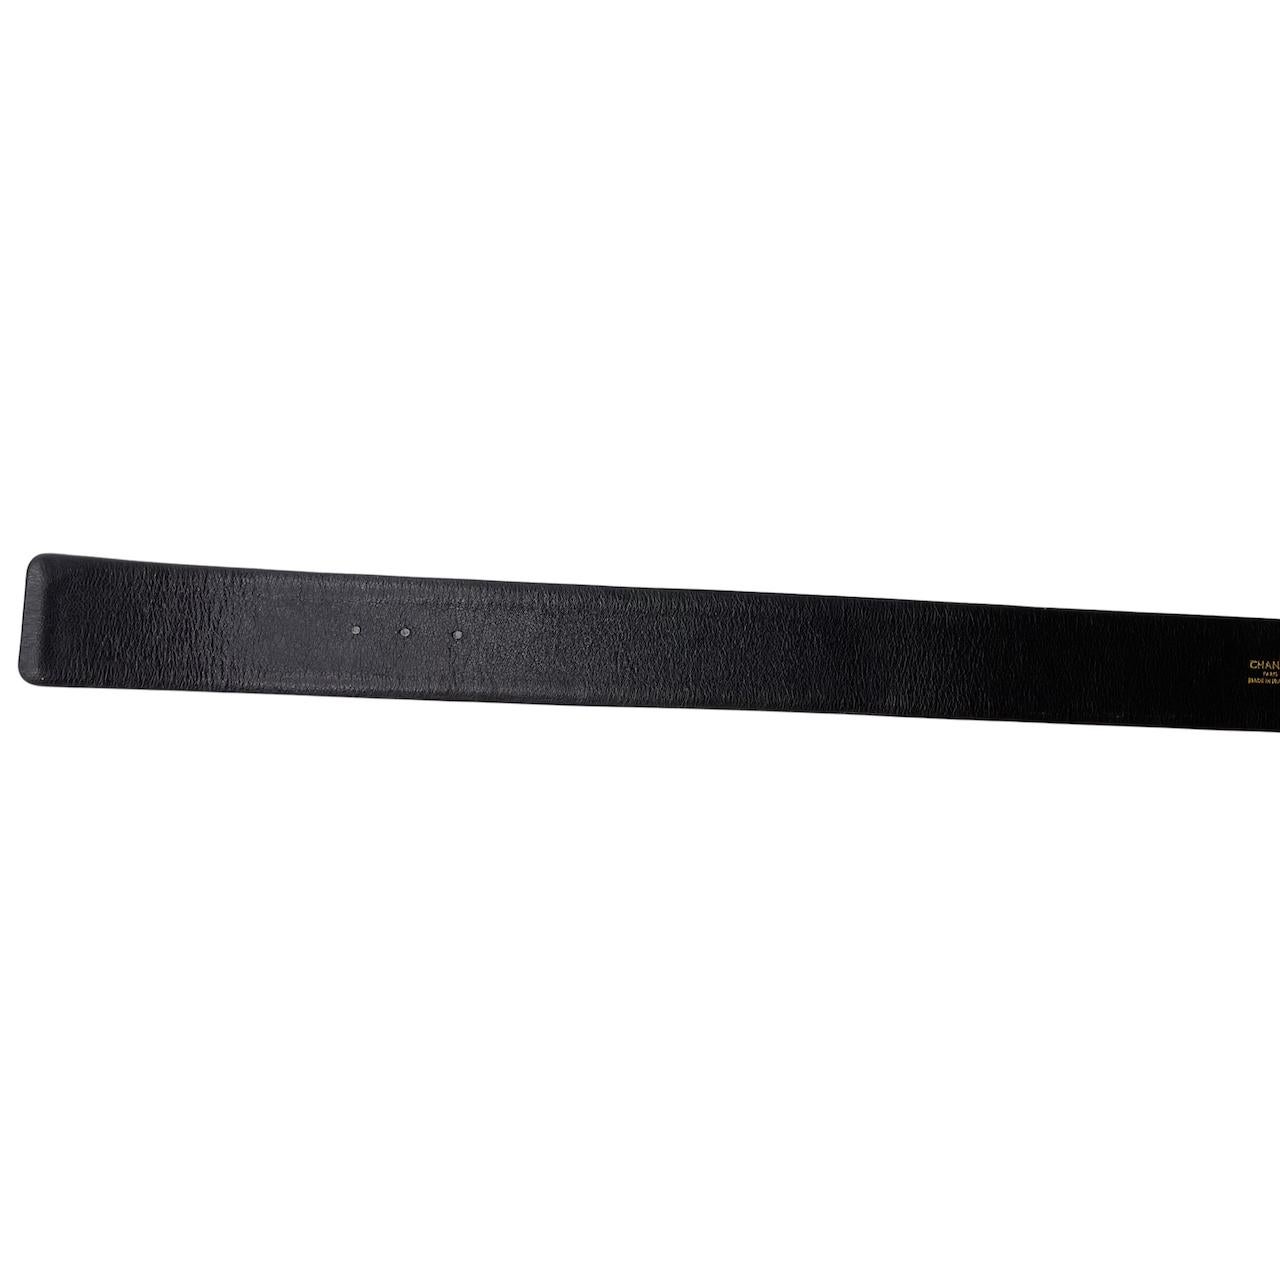 Chanel Vintage Black Leather Wasit Belt 1990 (75/30) In Good Condition For Sale In Montreal, Quebec